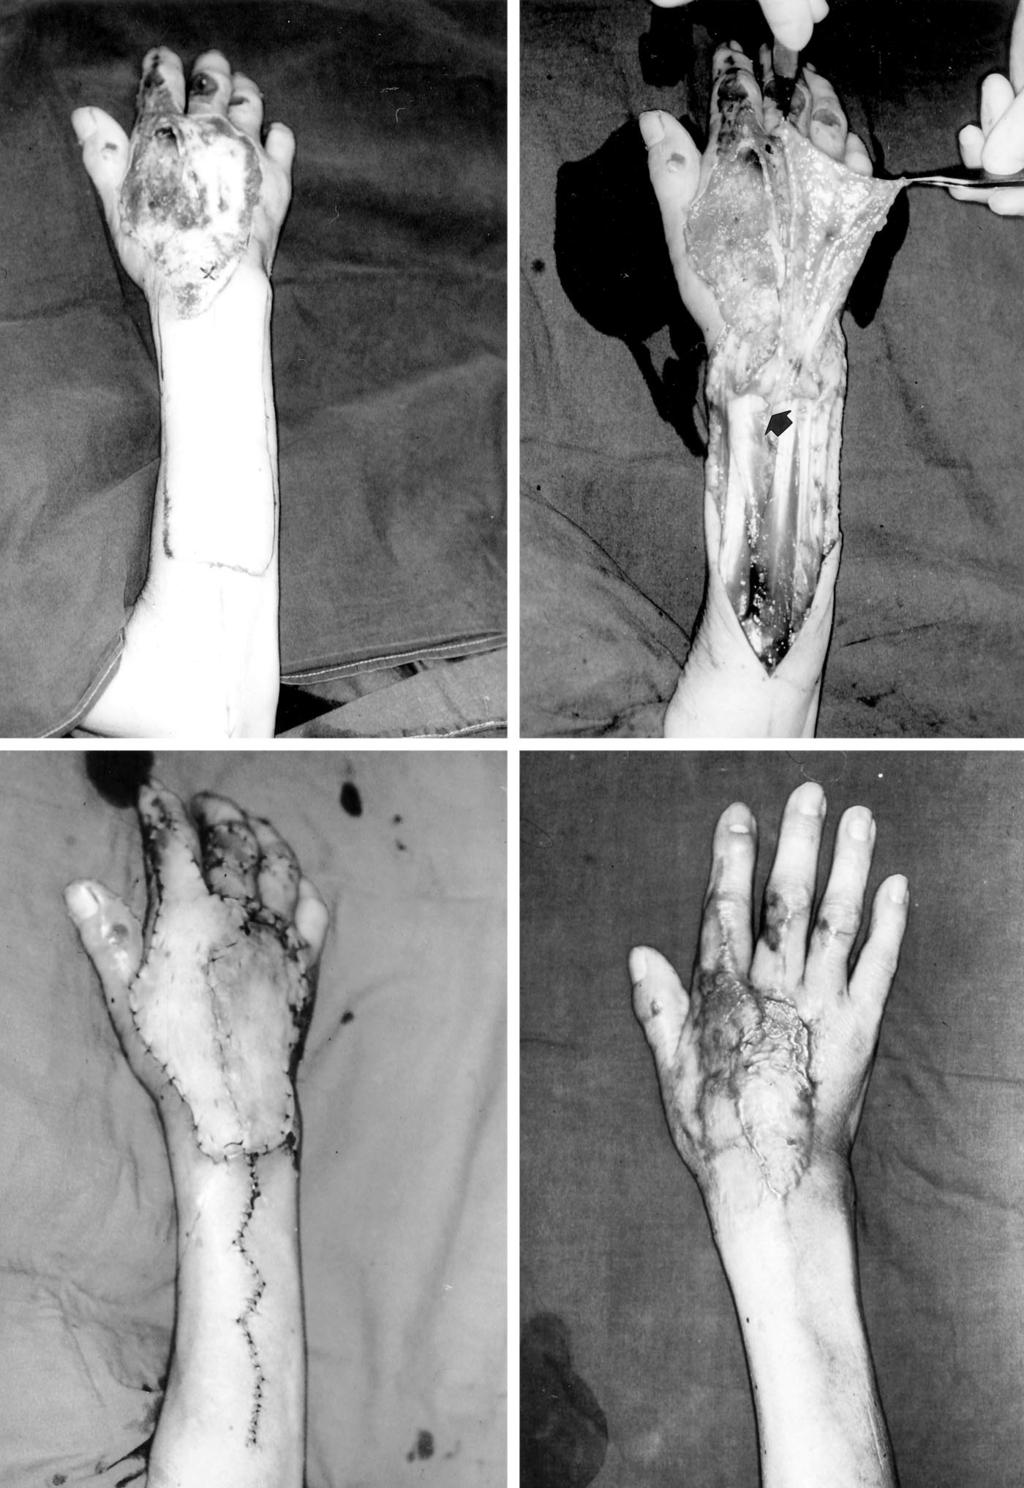 394 PLASTIC AND RECONSTRUCTIVE SURGERY, August 2004 FIG. 5. Case 2. A 62-year-old woman with a full-thickness flame burn on the dorsum of her right hand. (Above, left) Preoperative view.